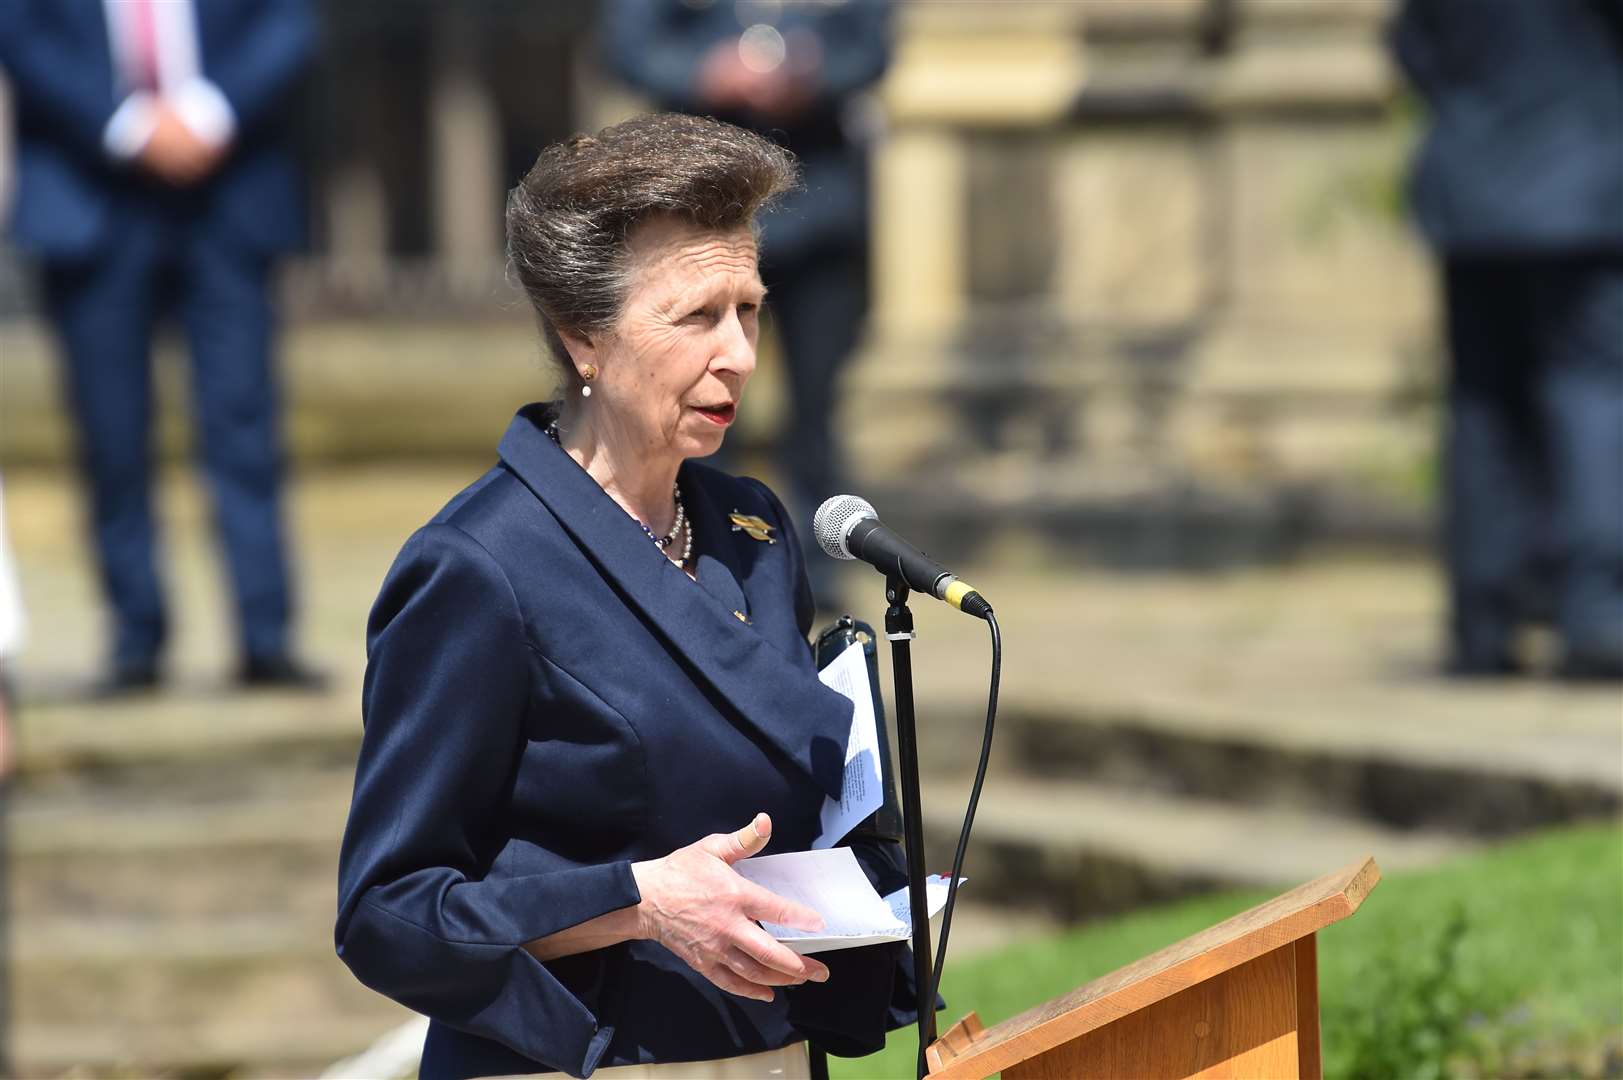 The Princess Royal opened a national memorial and garden of reflection for the Battle of the Atlantic during a visit to Our Lady And St Nicholas’s Church in Liverpool (Peter Byrne/PA)